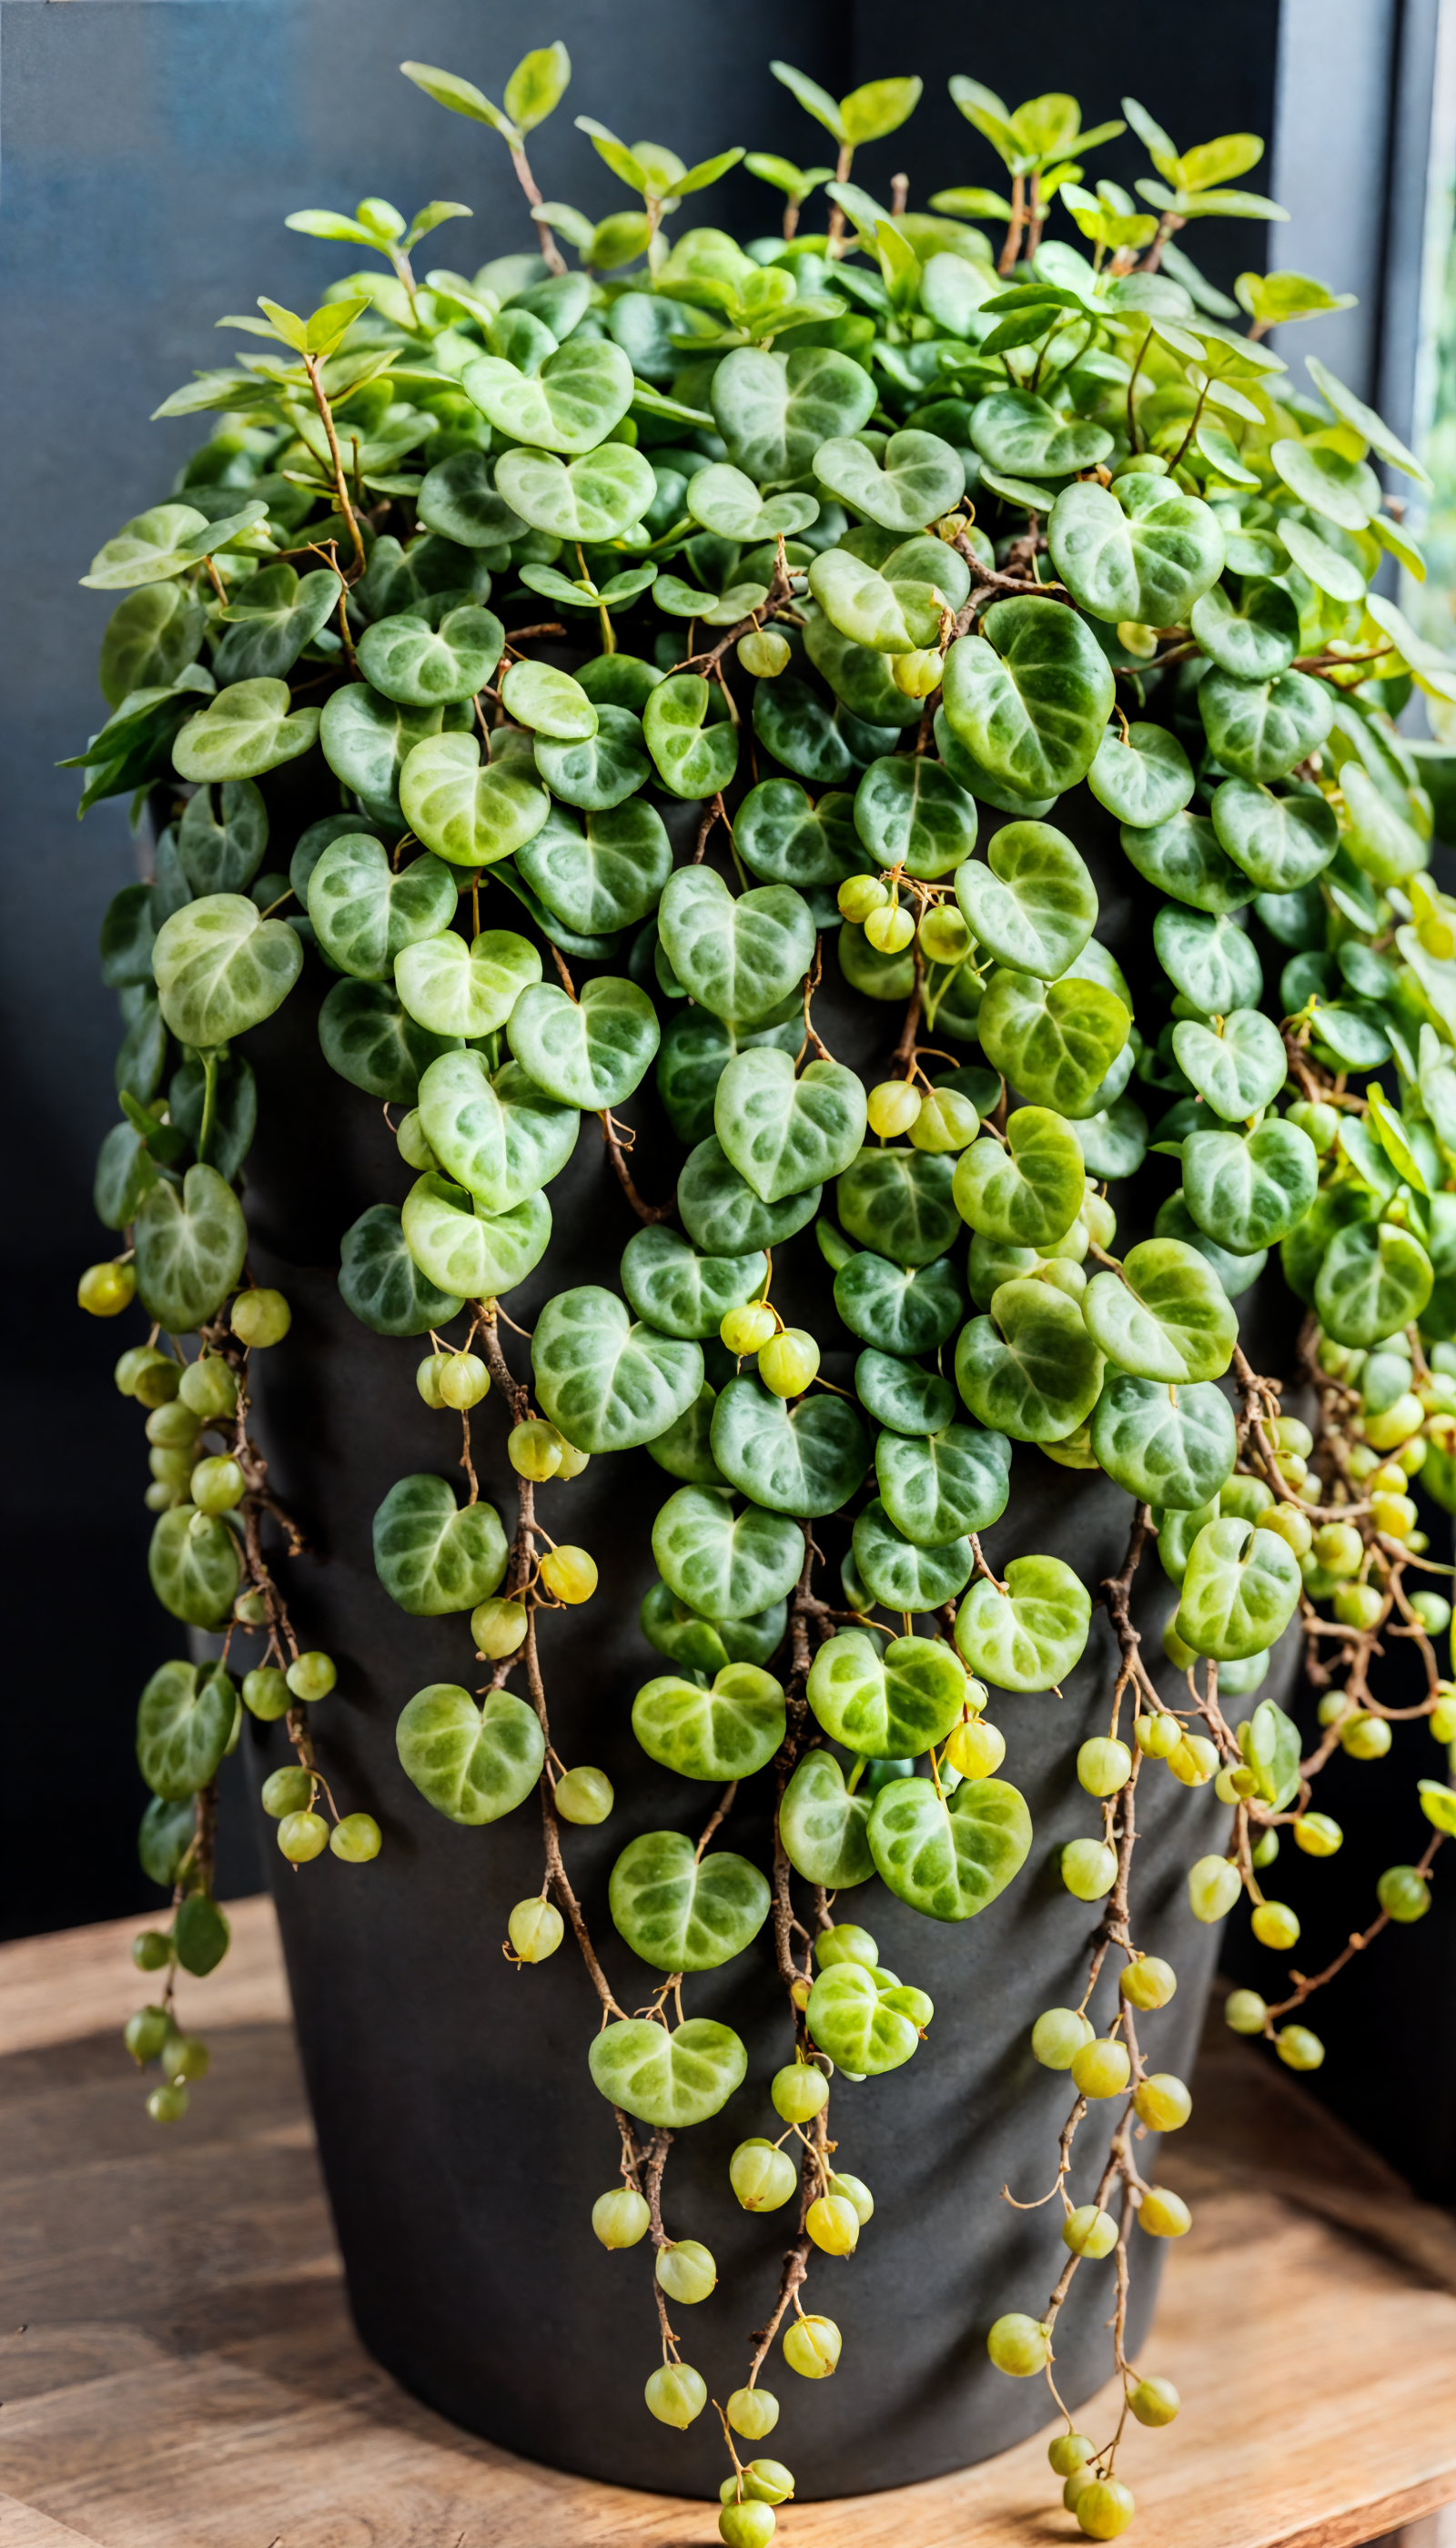 Peperomia prostrata in a planter on a wooden table, with clear lighting and a dark background.